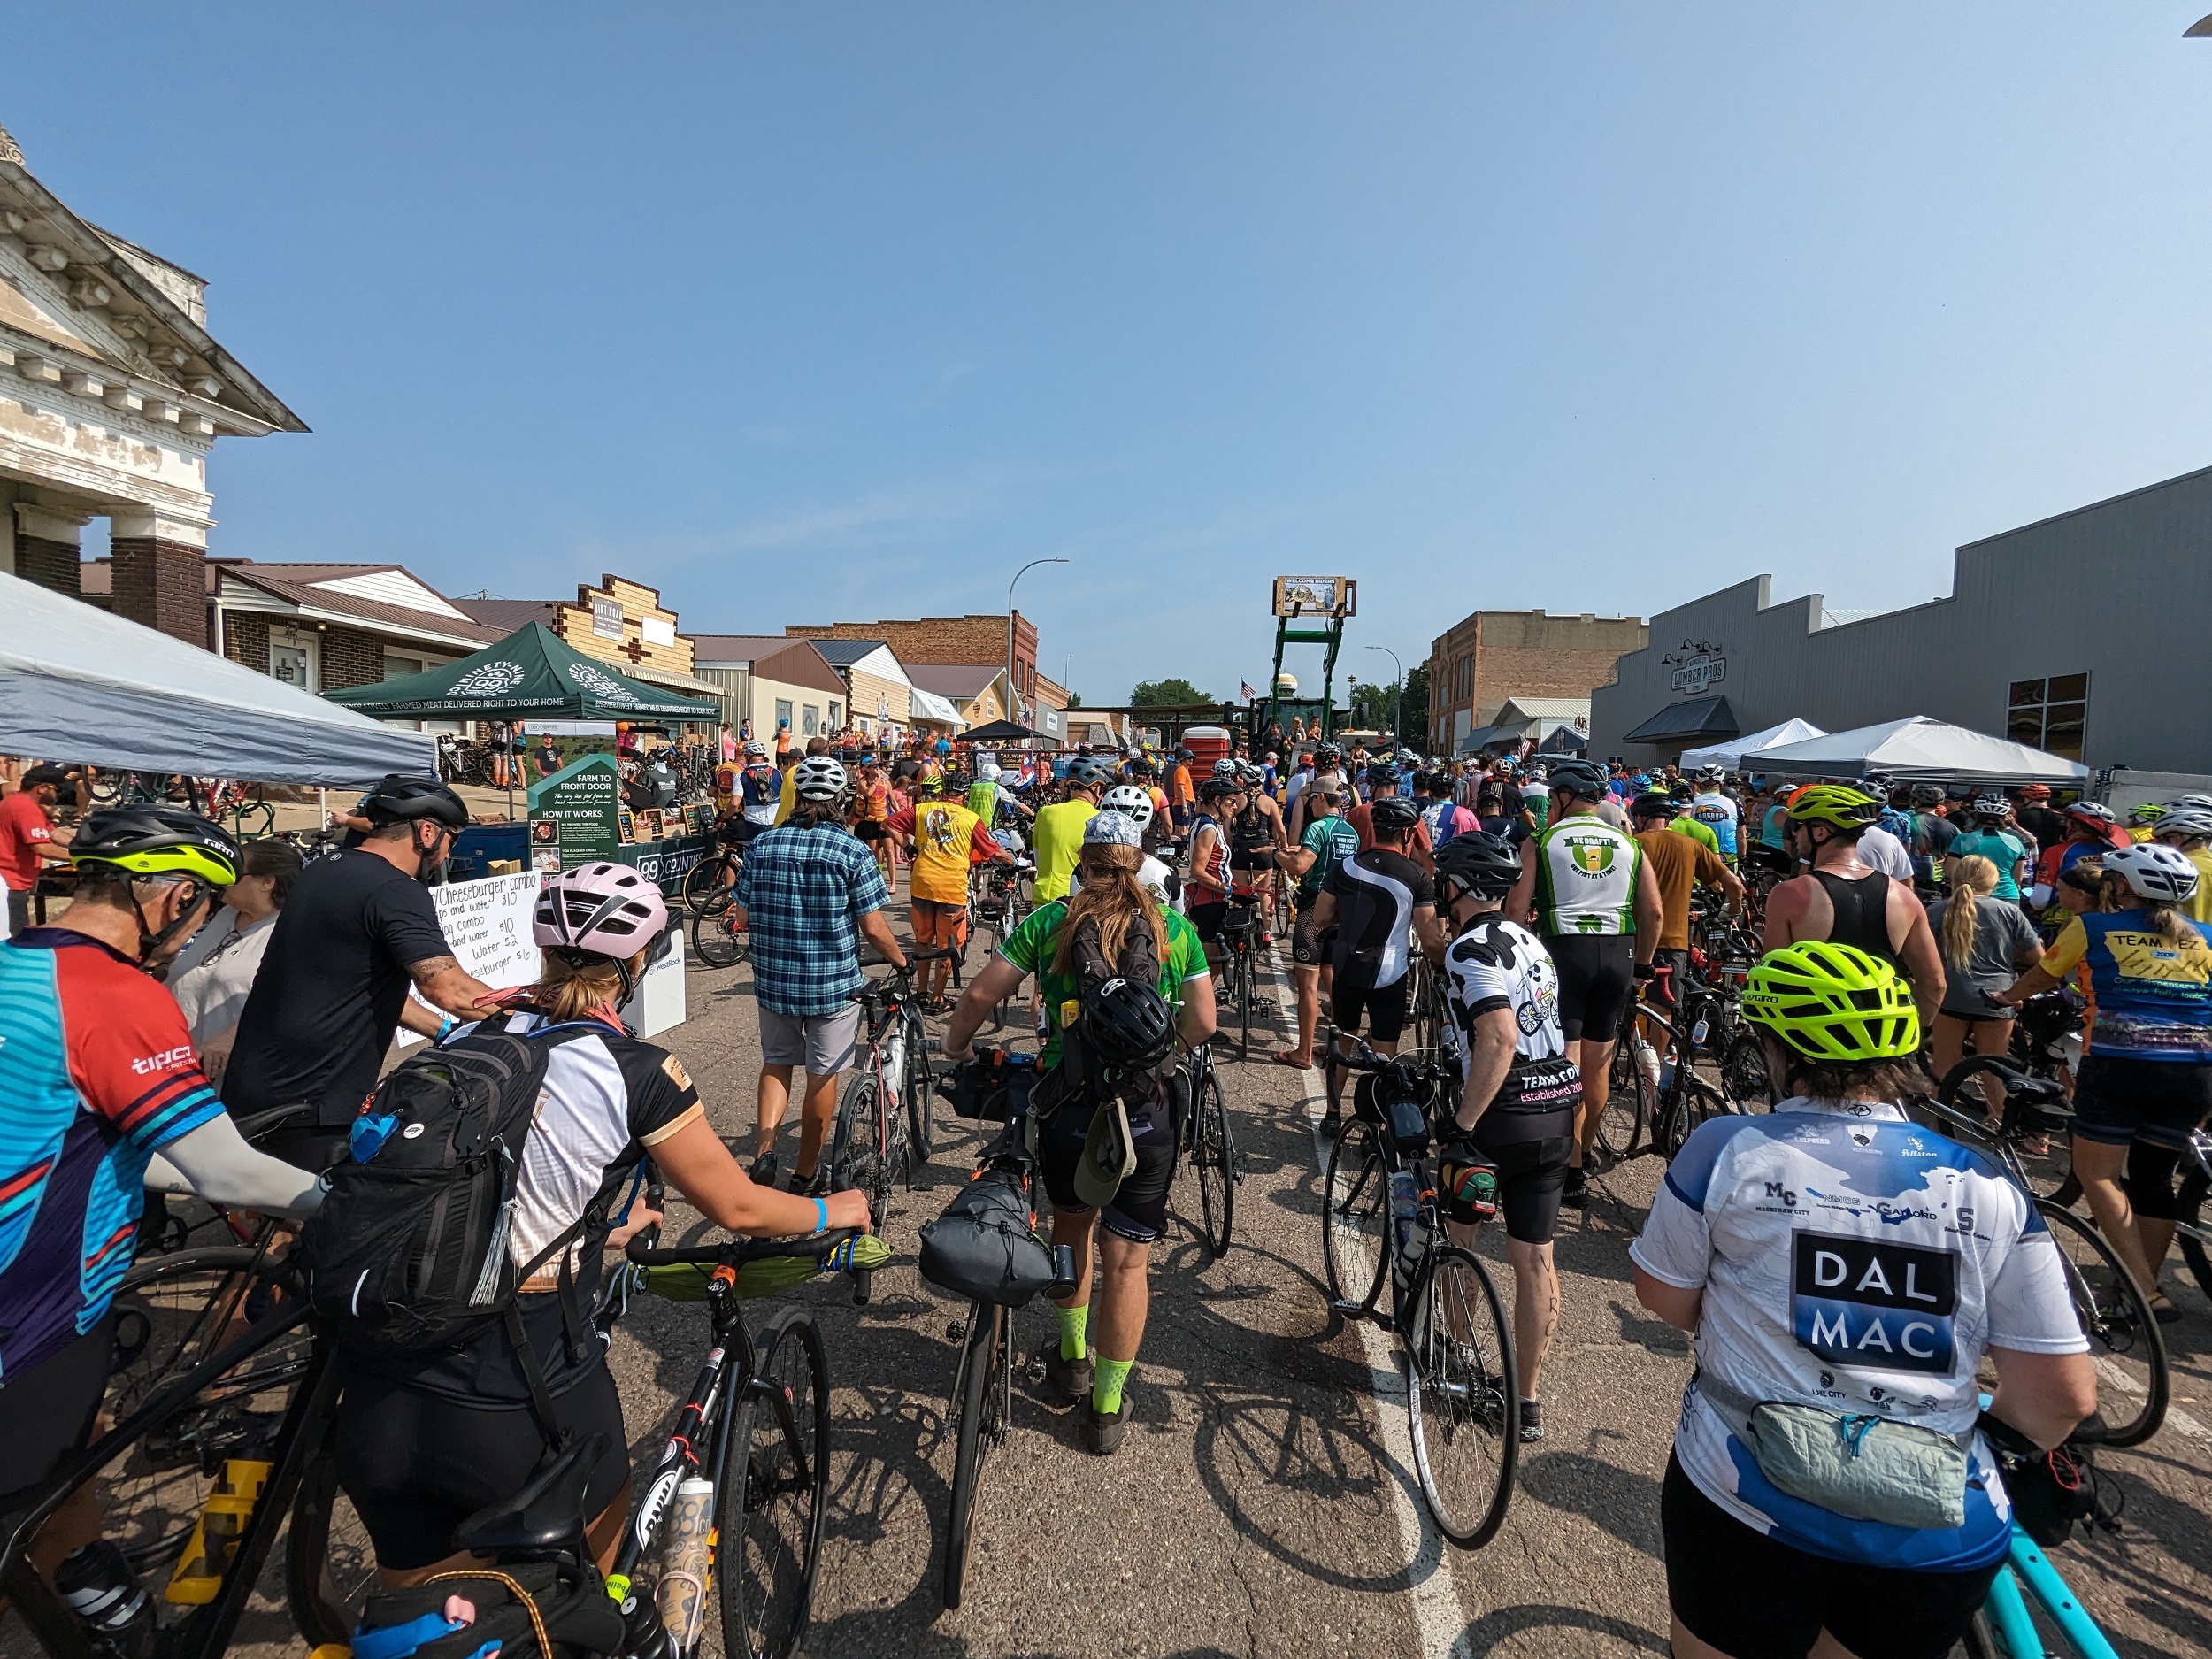 A large crowd of cyclists walking their bikes on a small town street